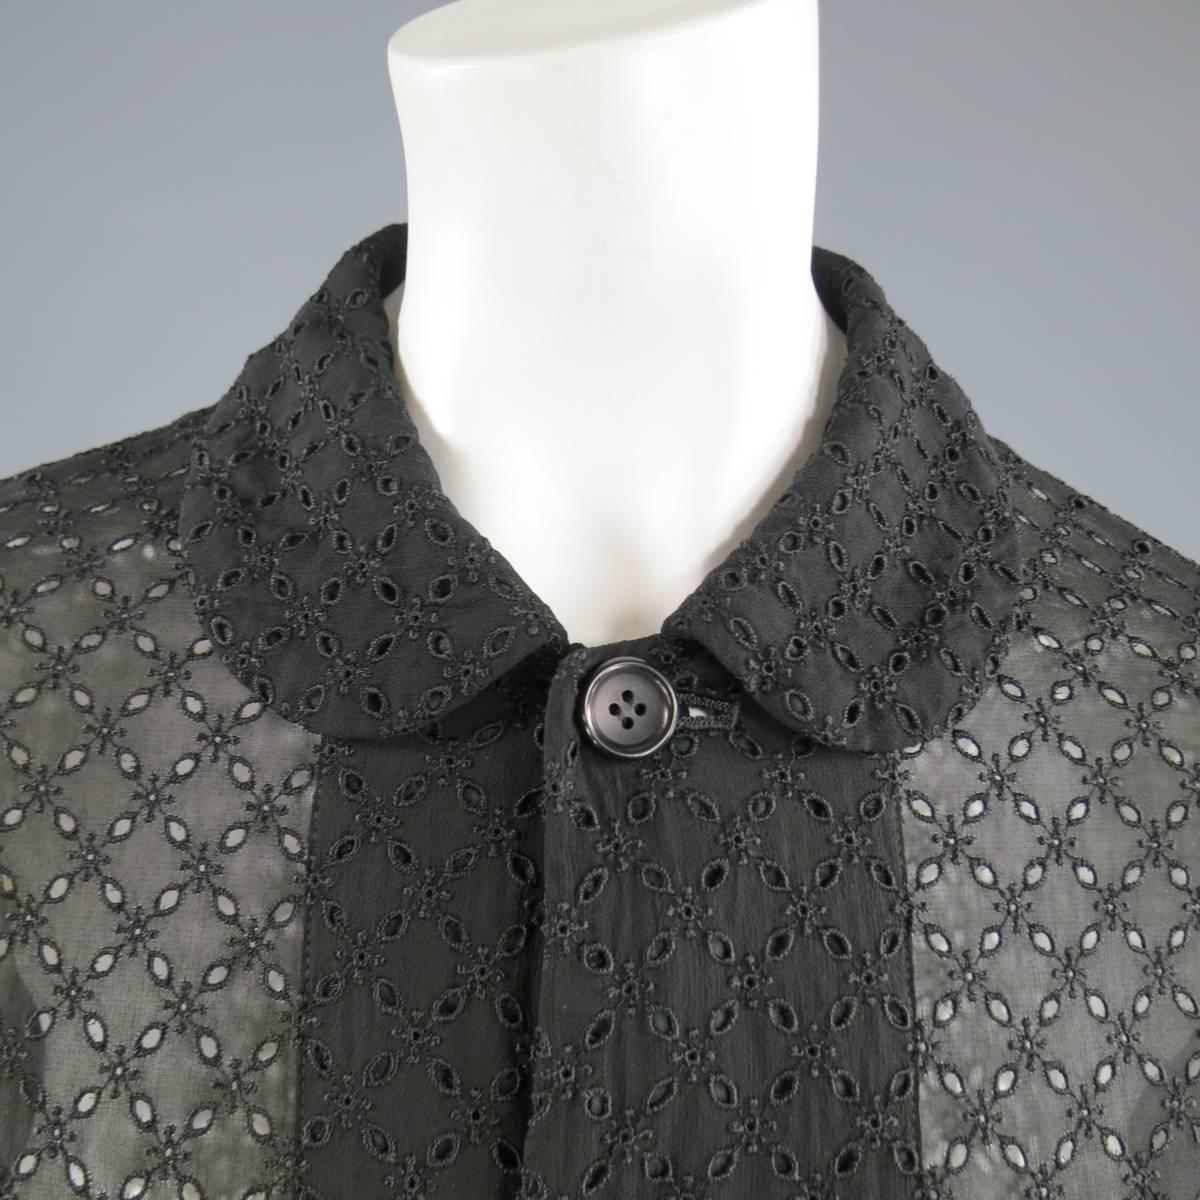 This COMME DES GARCONS jacket comes in a sheer black cupro with emboidered cutout pattern throughout and features a button up front, Peter Pan rounded collar, and cut pocket accent. Made in Japan.
 
Very good Pre-Owned Condition.
Marked: M
